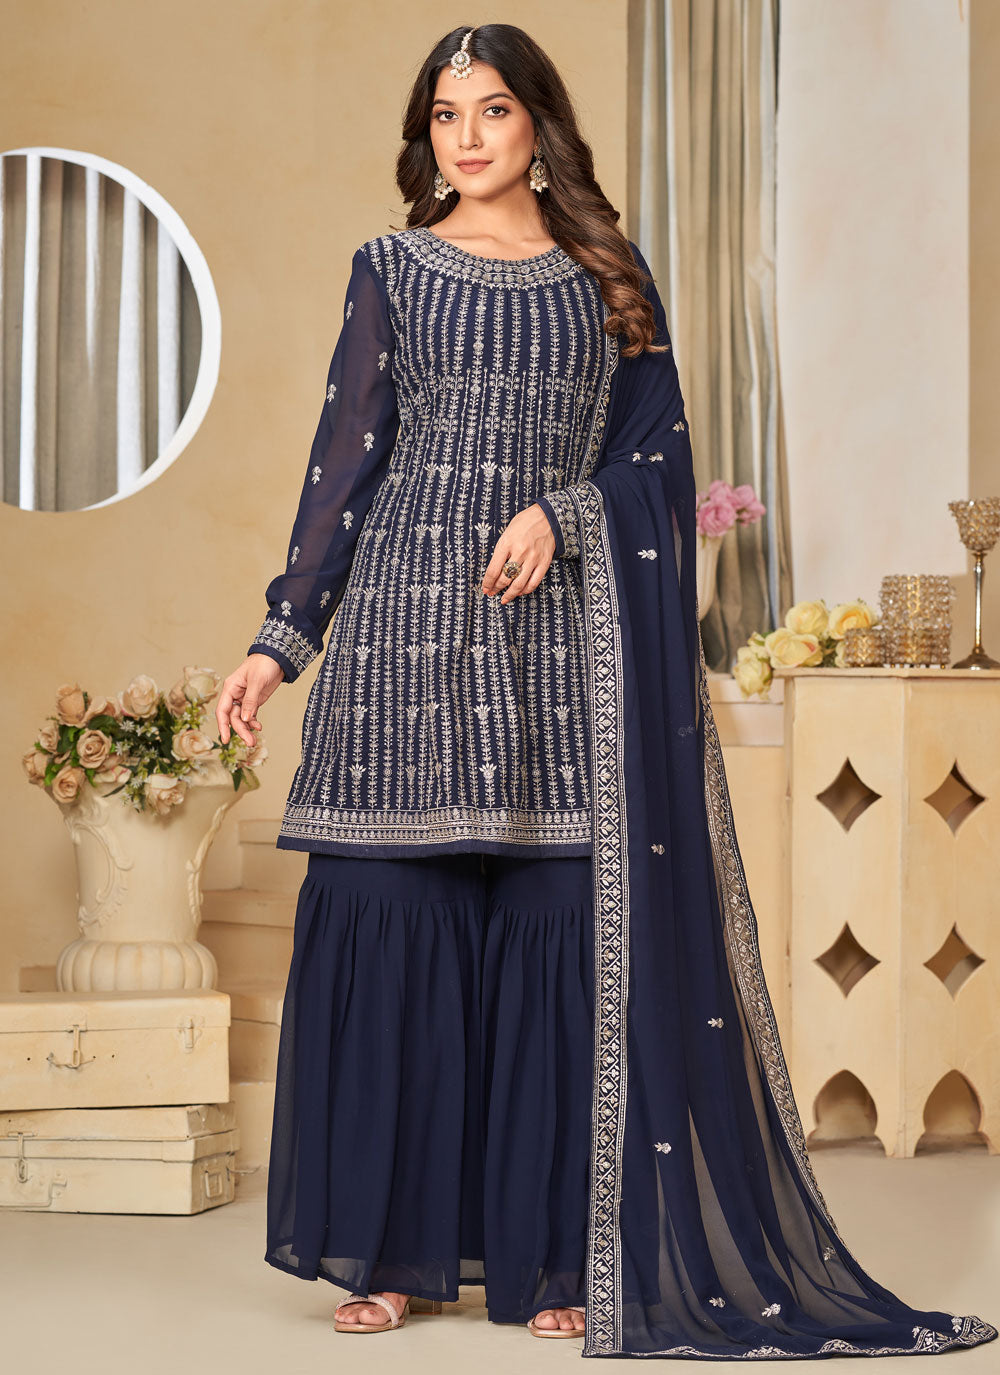 Blue Faux Georgette Salwar Suit With Embroidered Work For Engagement